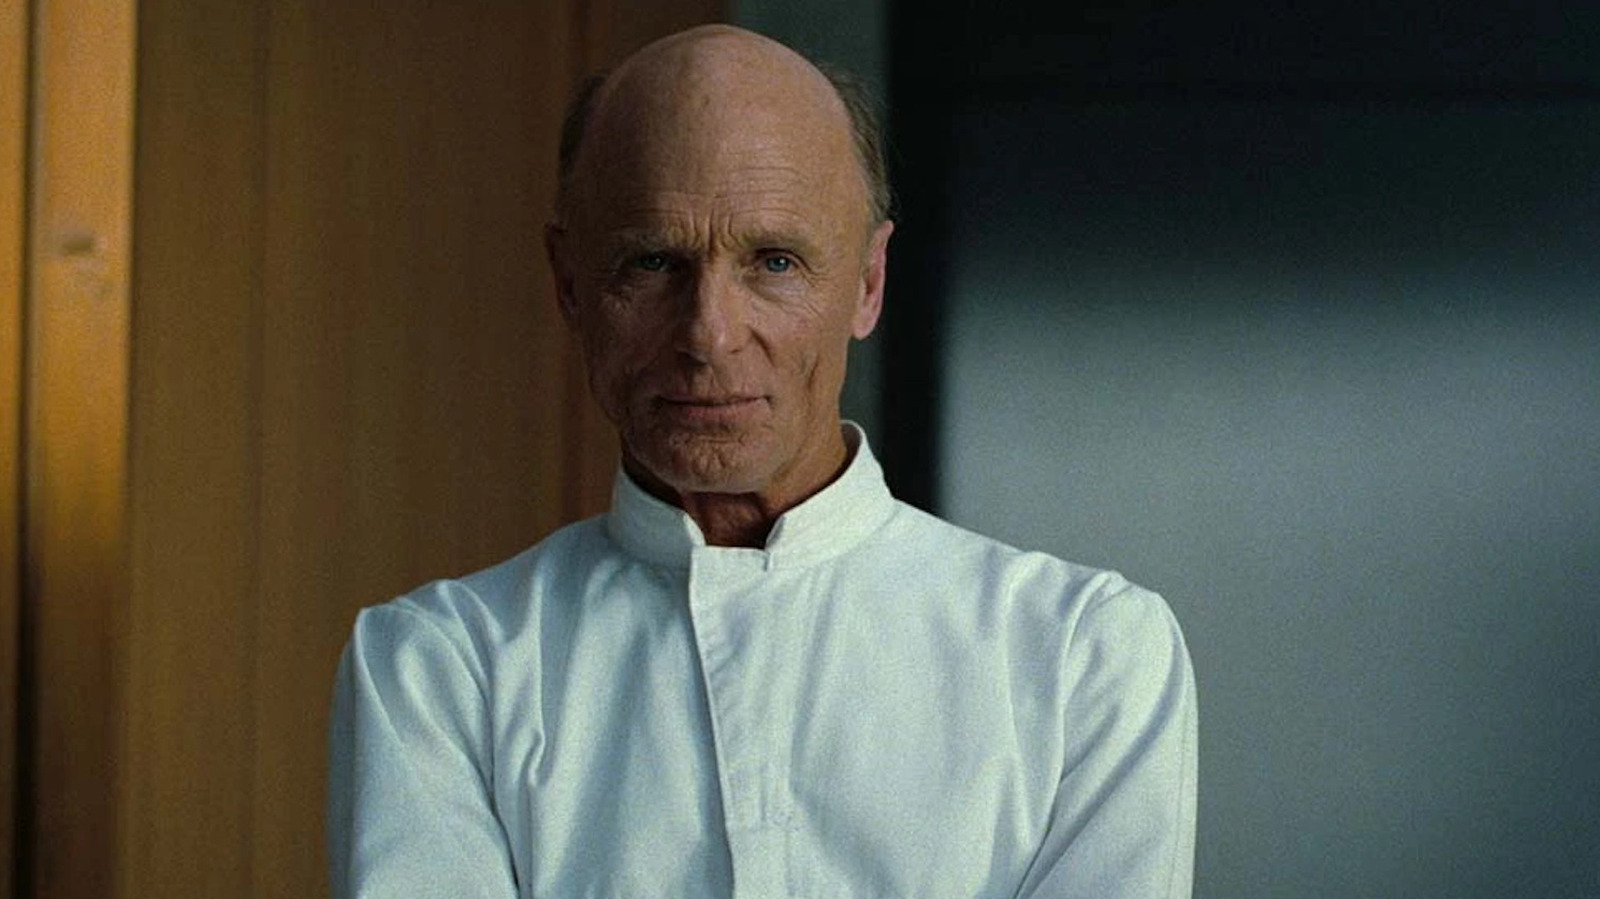 #Westworld’s Ed Harris On The Difference In Playing A Host Vs. A Human